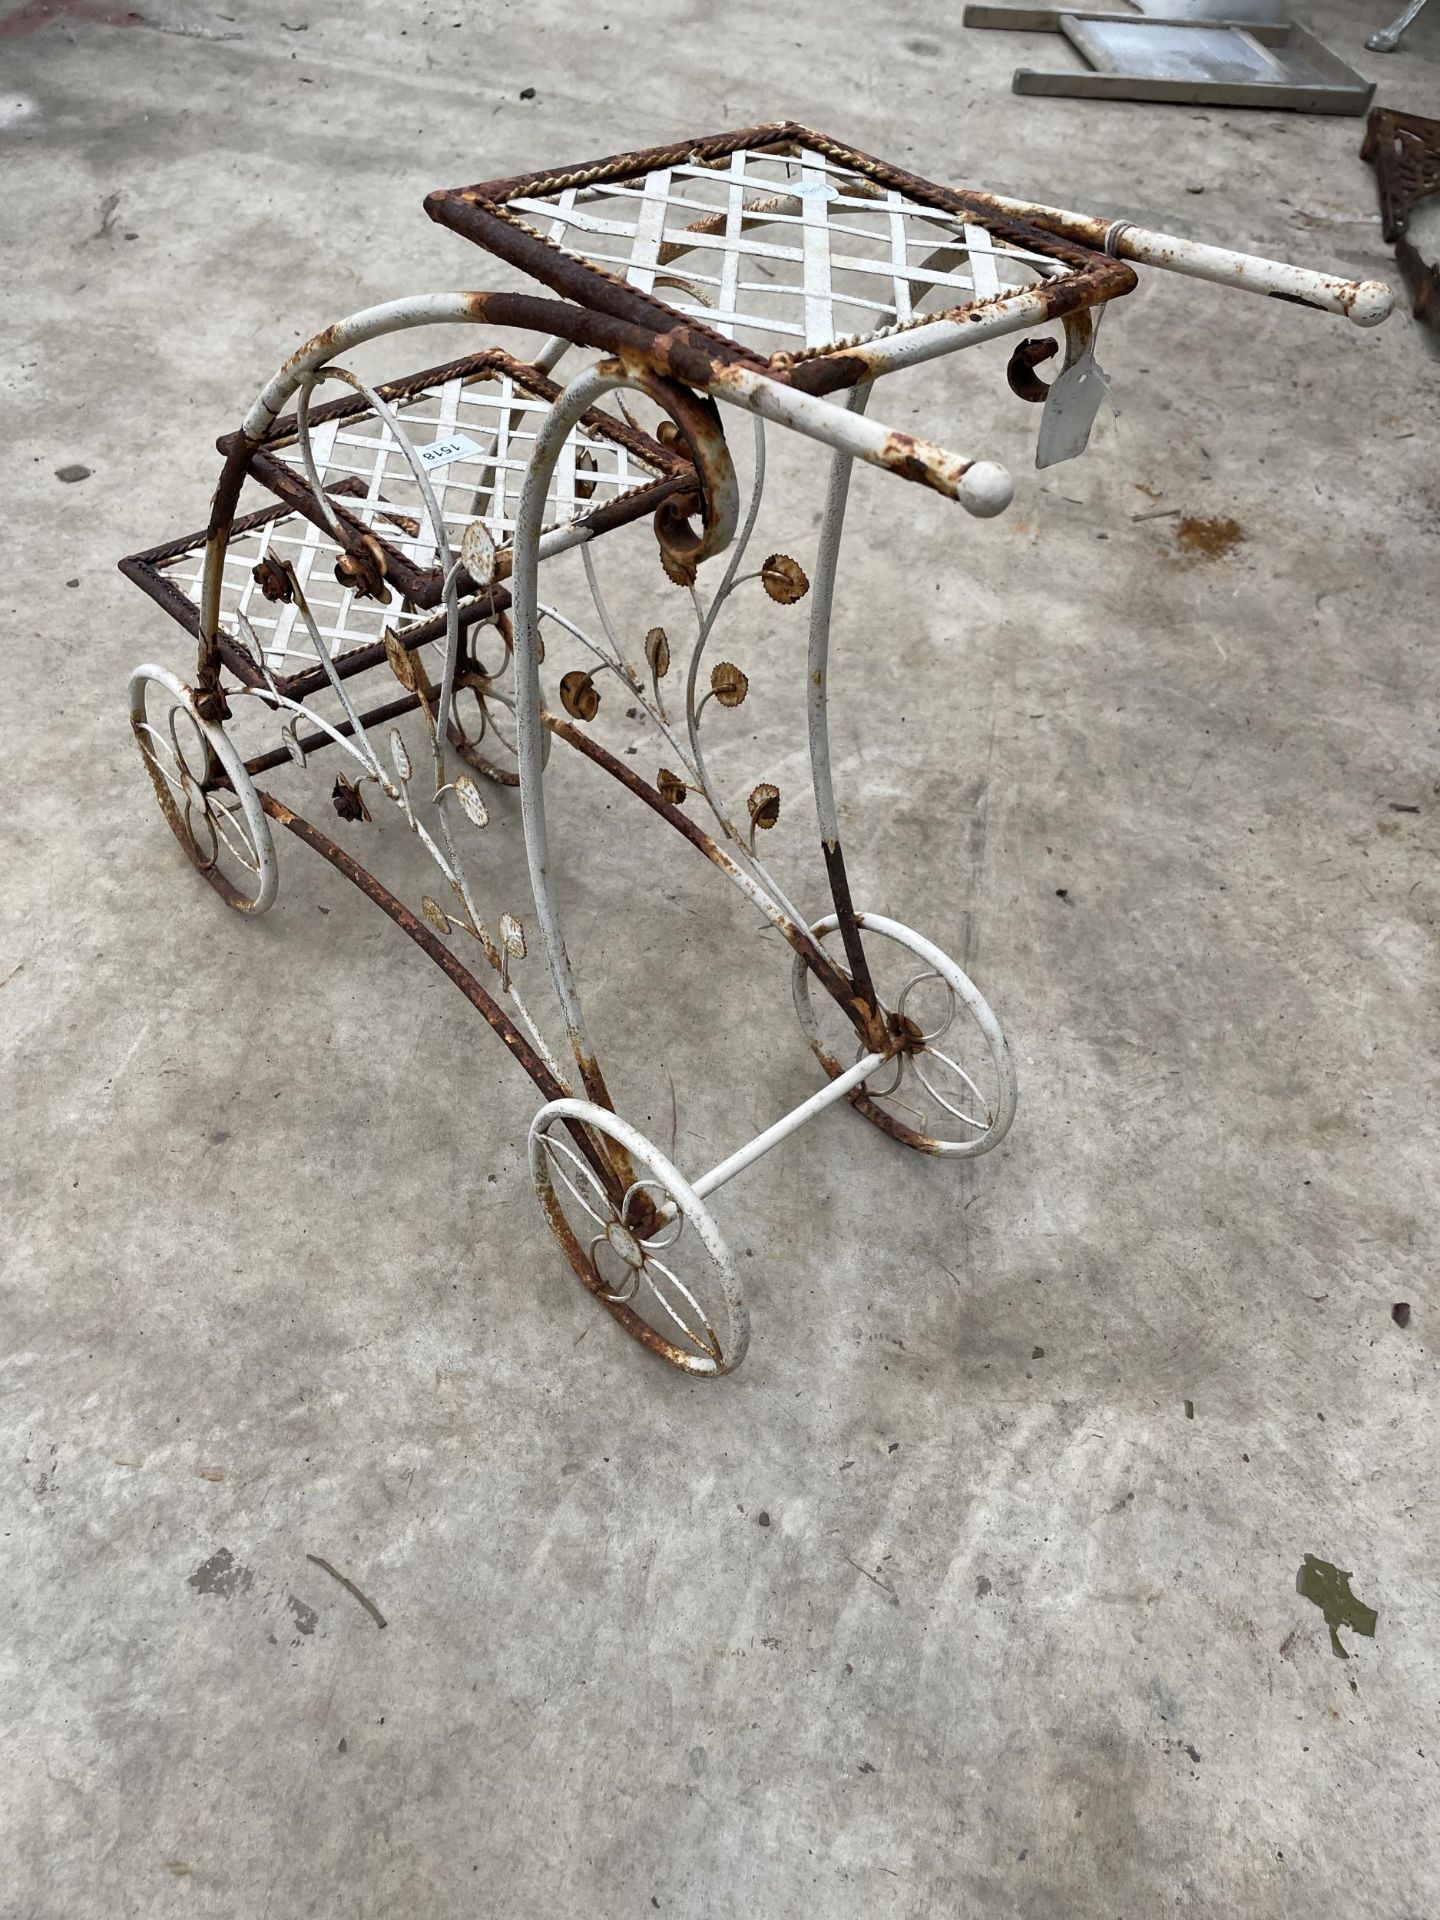 A DECORATIVE METAL THREE TIER PLANT STAND IN THE FORM OF A TROLLEY - Image 2 of 5